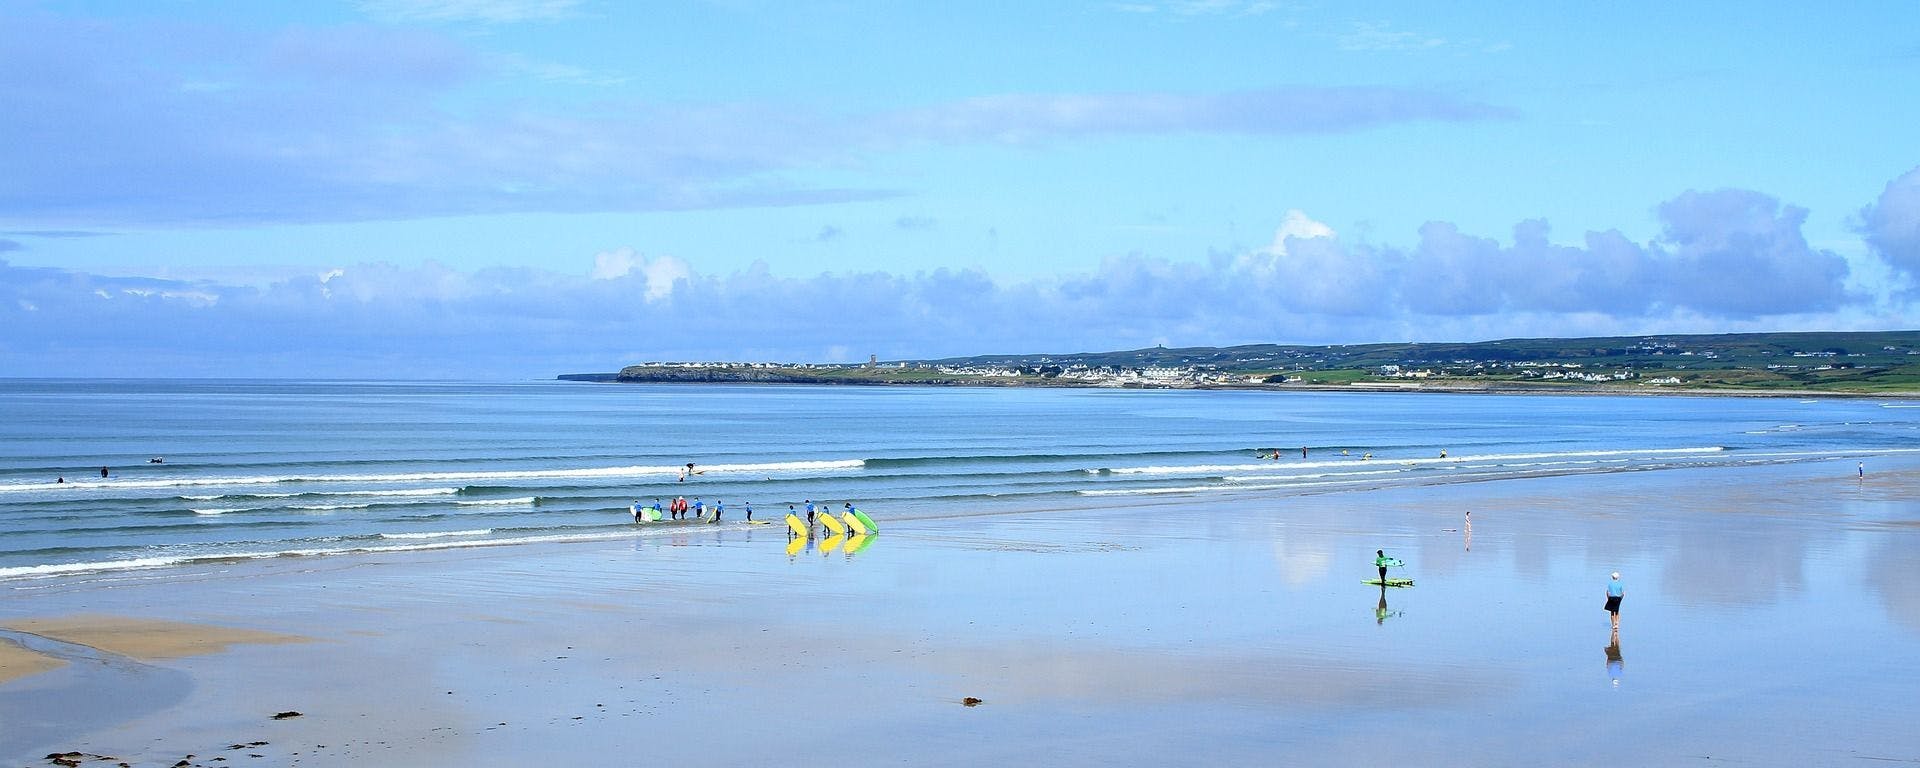 Coworking, Coliving and Surfing in Lahinch (Ireland)